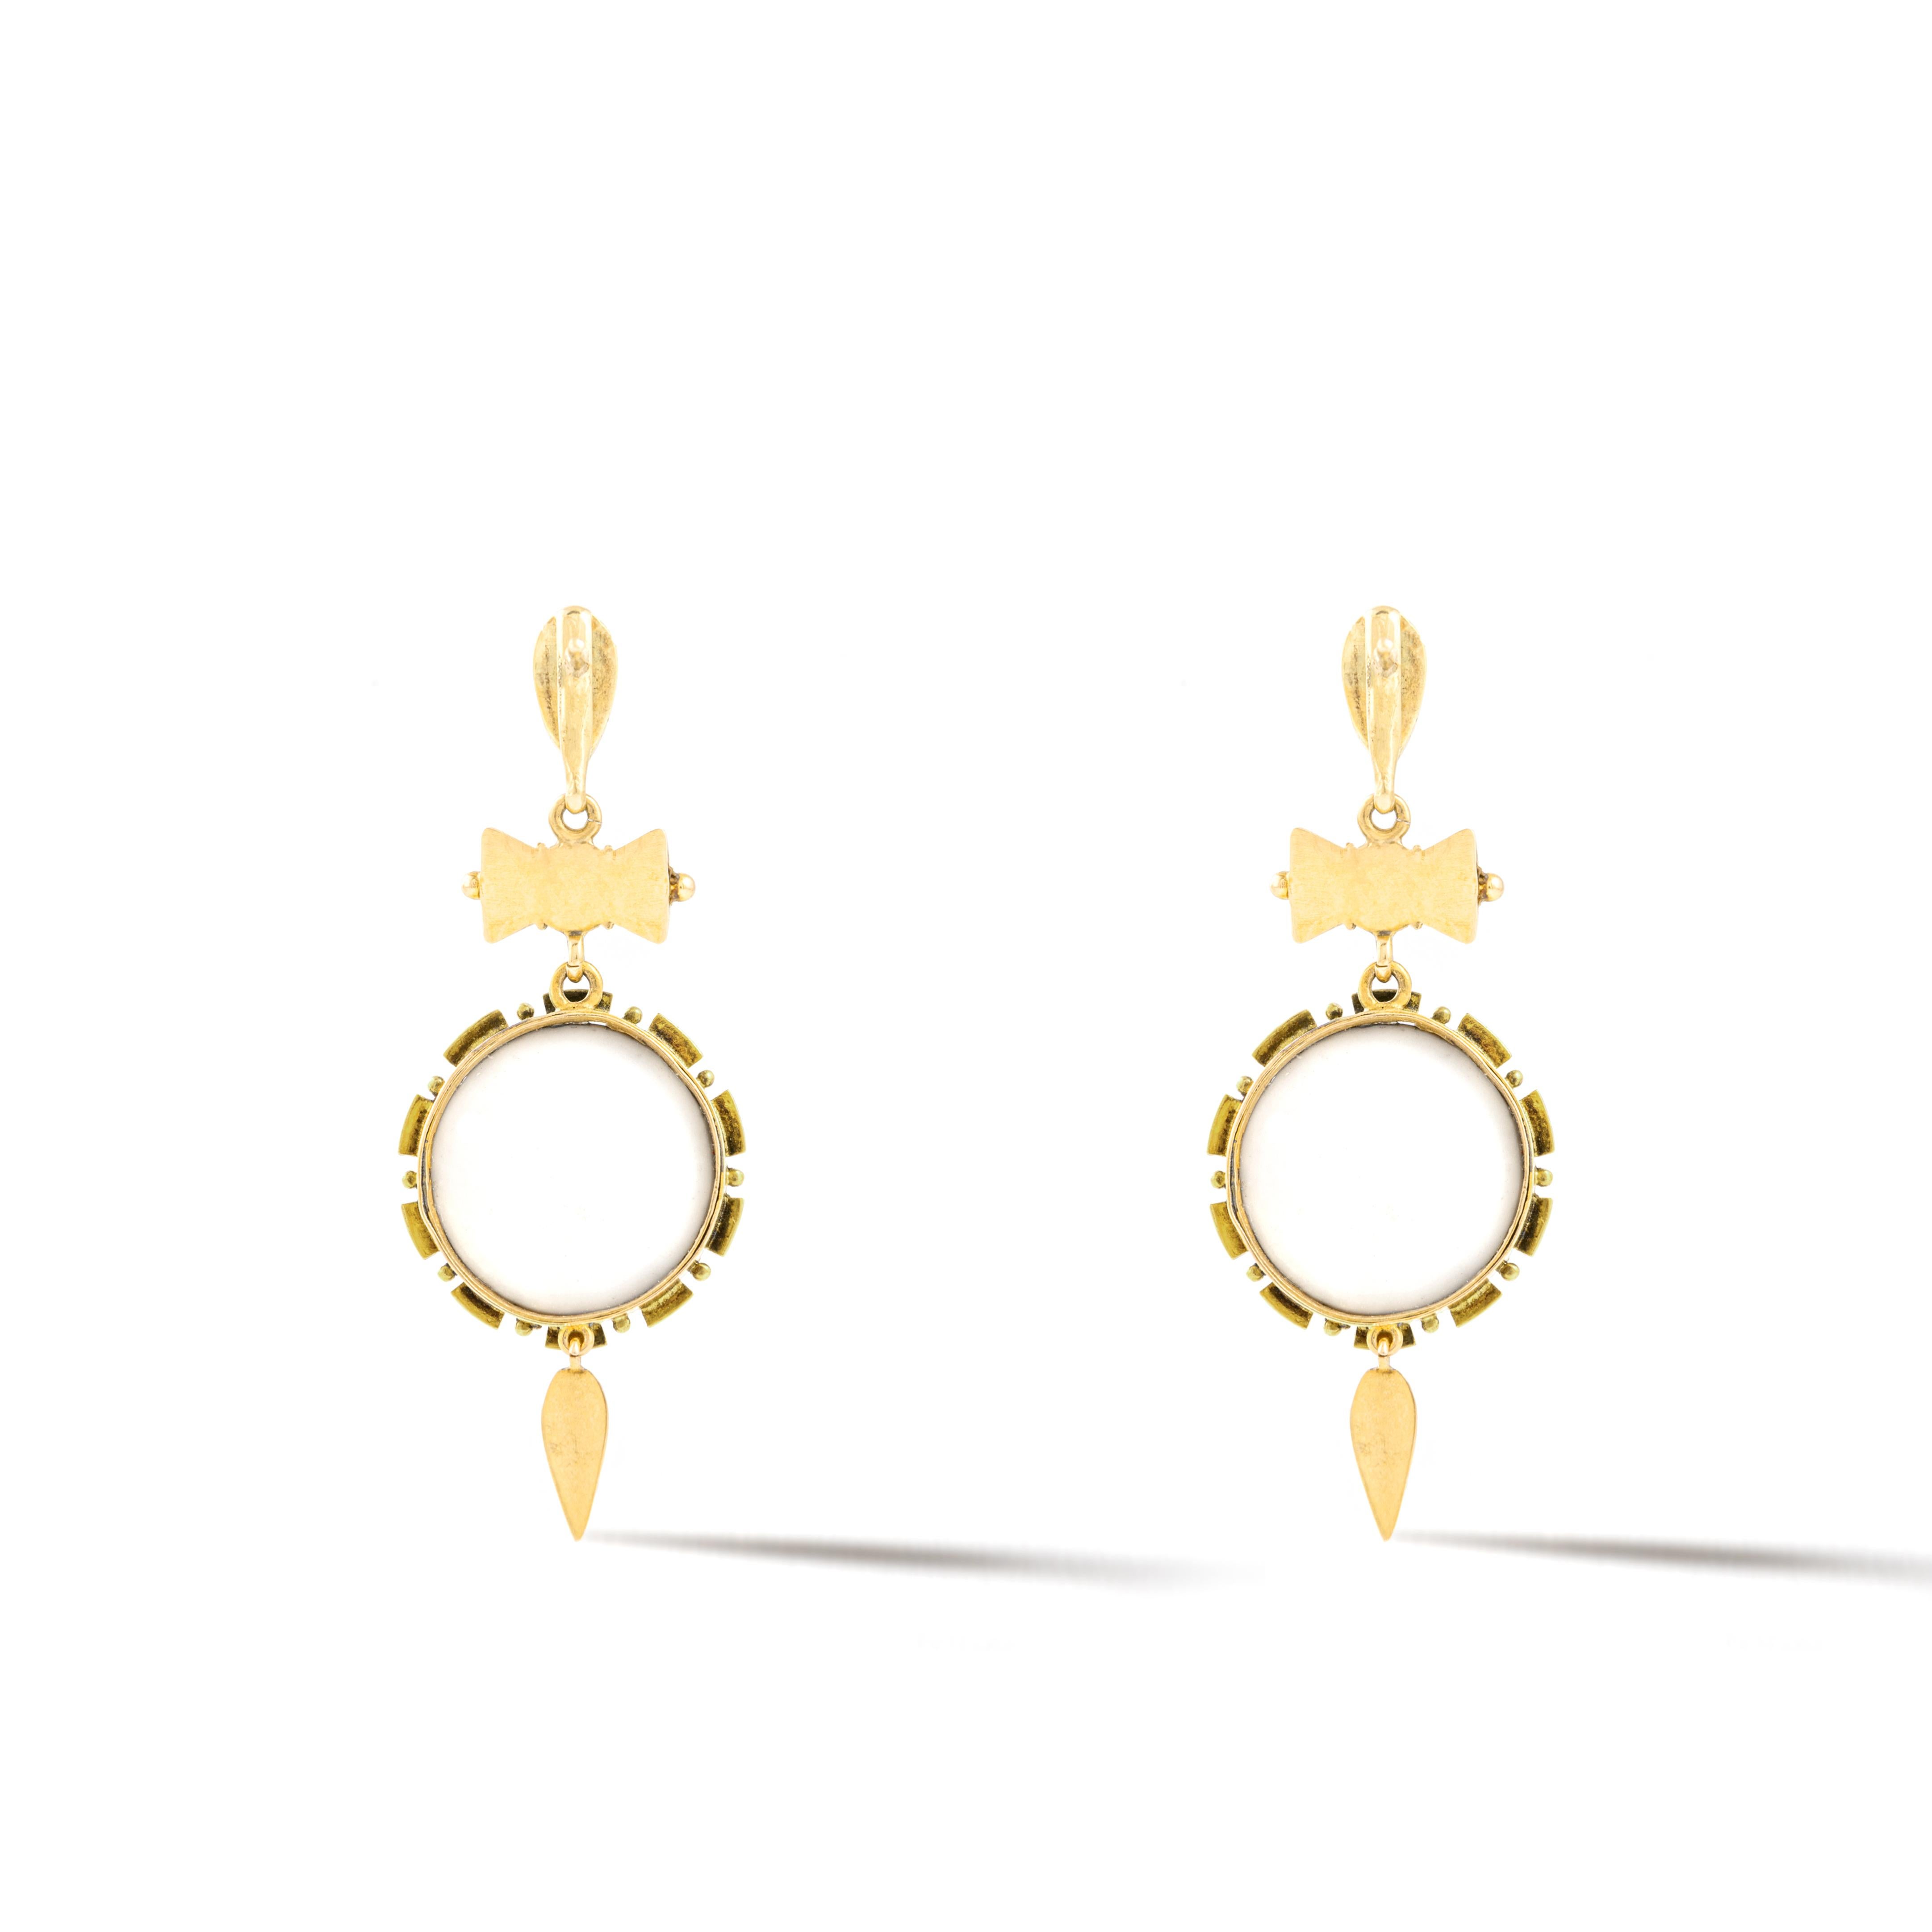 Renaissance Revival Antique Yellow Gold and Ceramic Earrings For Sale